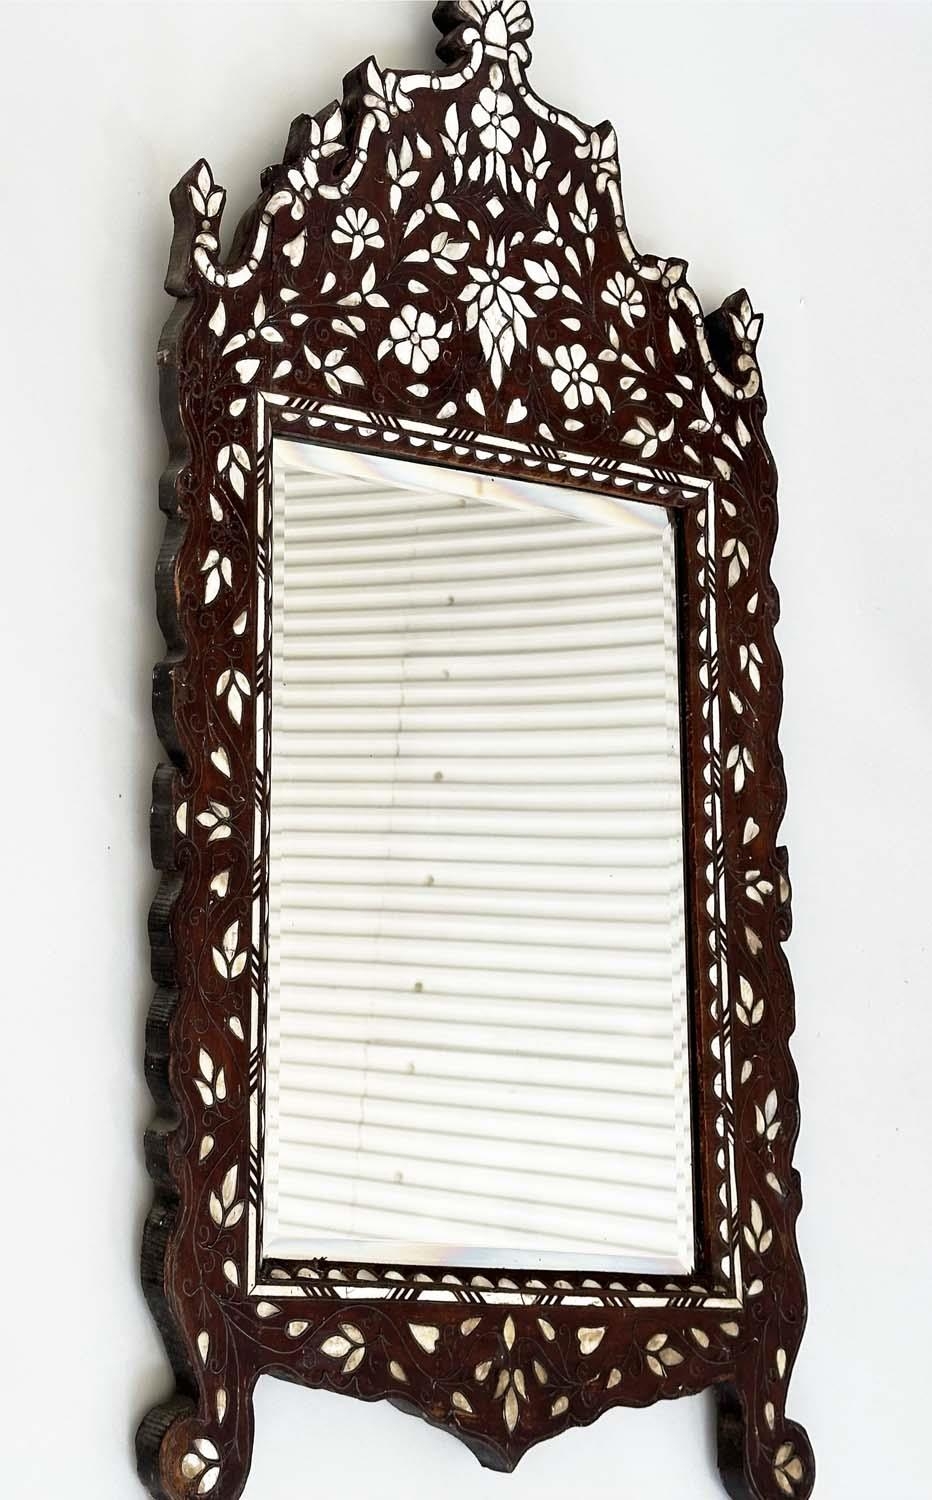 WALL MIRROR, early 20th century Syrian bone, silvered metal and mother of pearl inlay of crested - Image 5 of 7